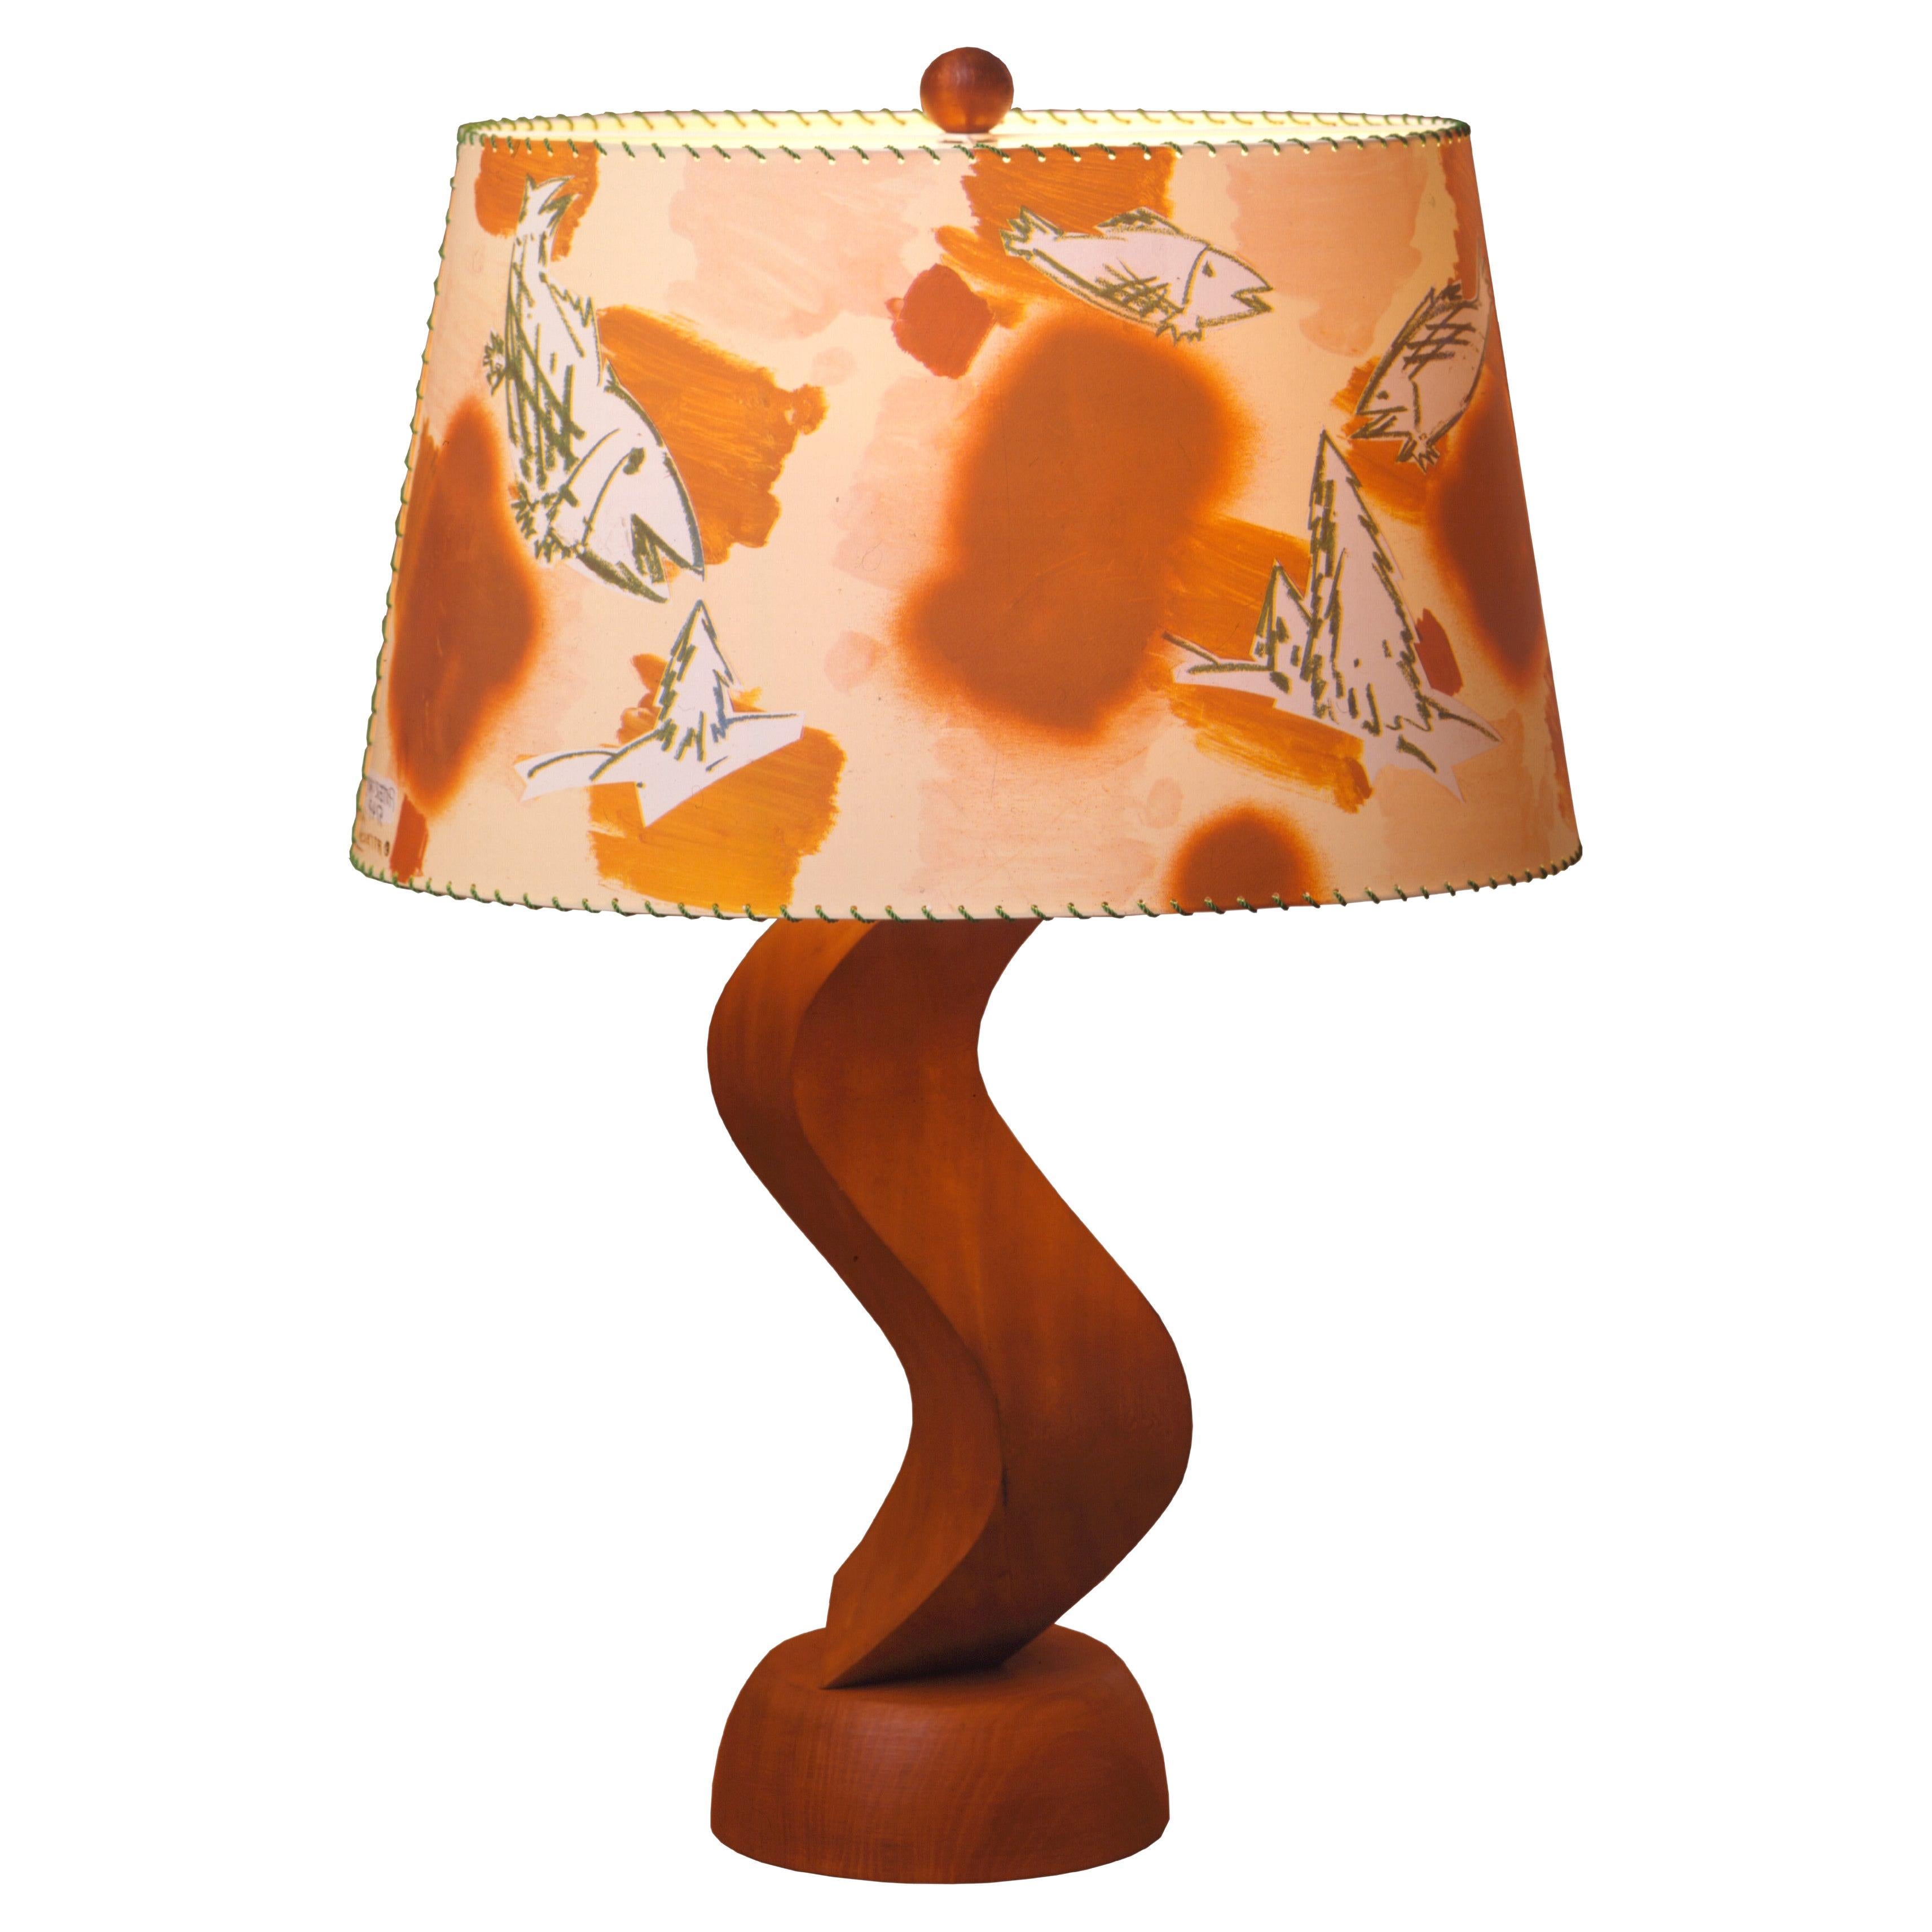 Original Christian Ludwig Attersee 1992 Table Lamp from Woka Art Collection For Sale